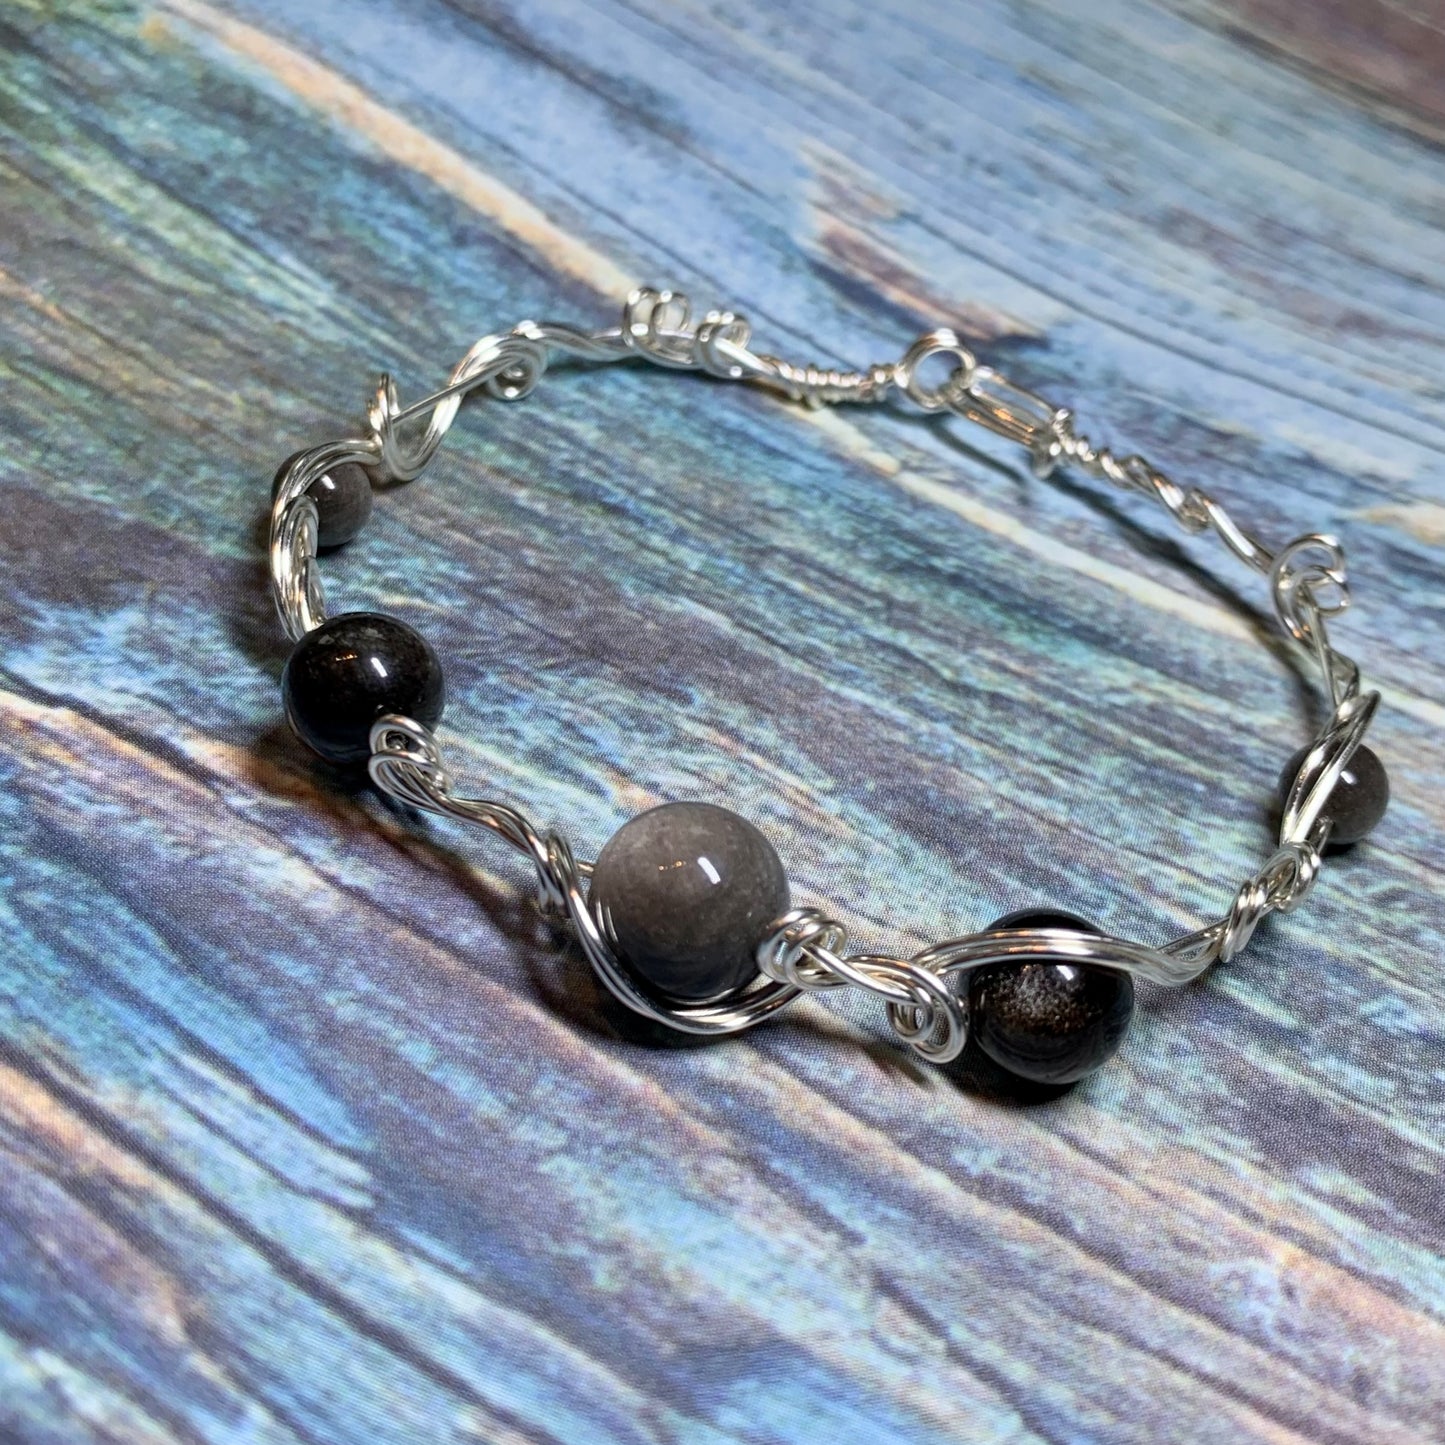 Custom obsidian bracelet but don’t order it yet because I will get very confused